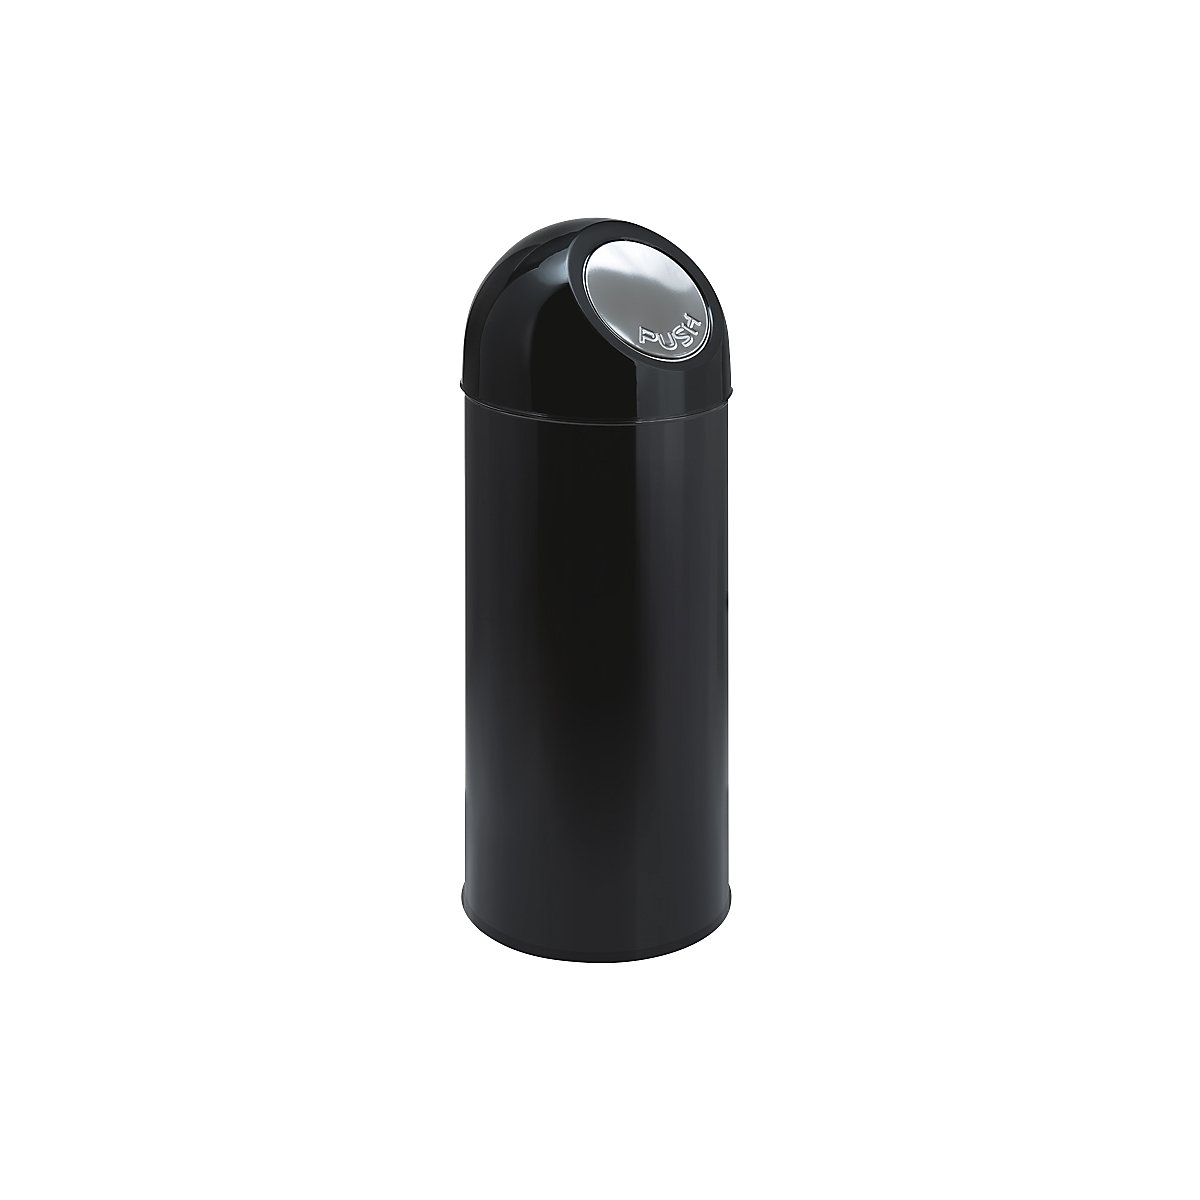 Push rubbish bin, capacity 55 l, zinc plated inner container, black, 2+ items-6